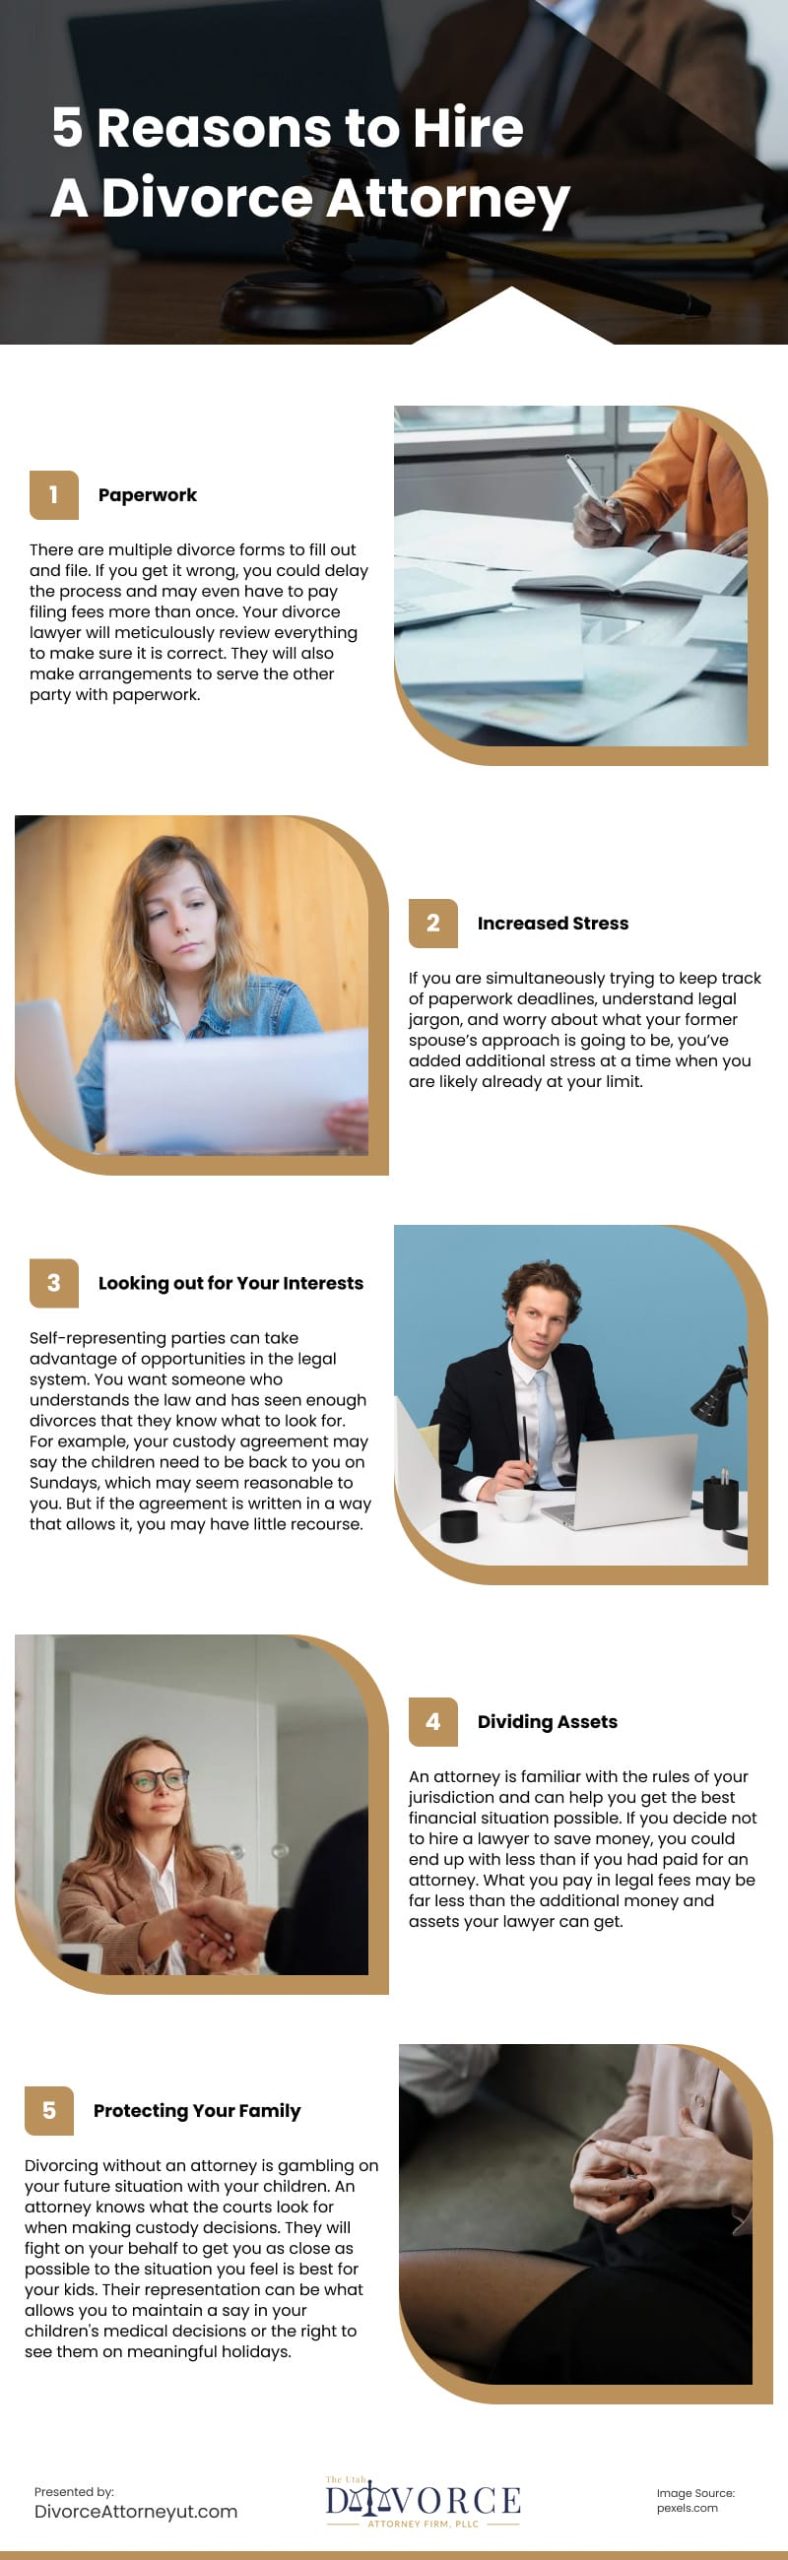 5 Reasons to Hire A Divorce Attorney Infographic